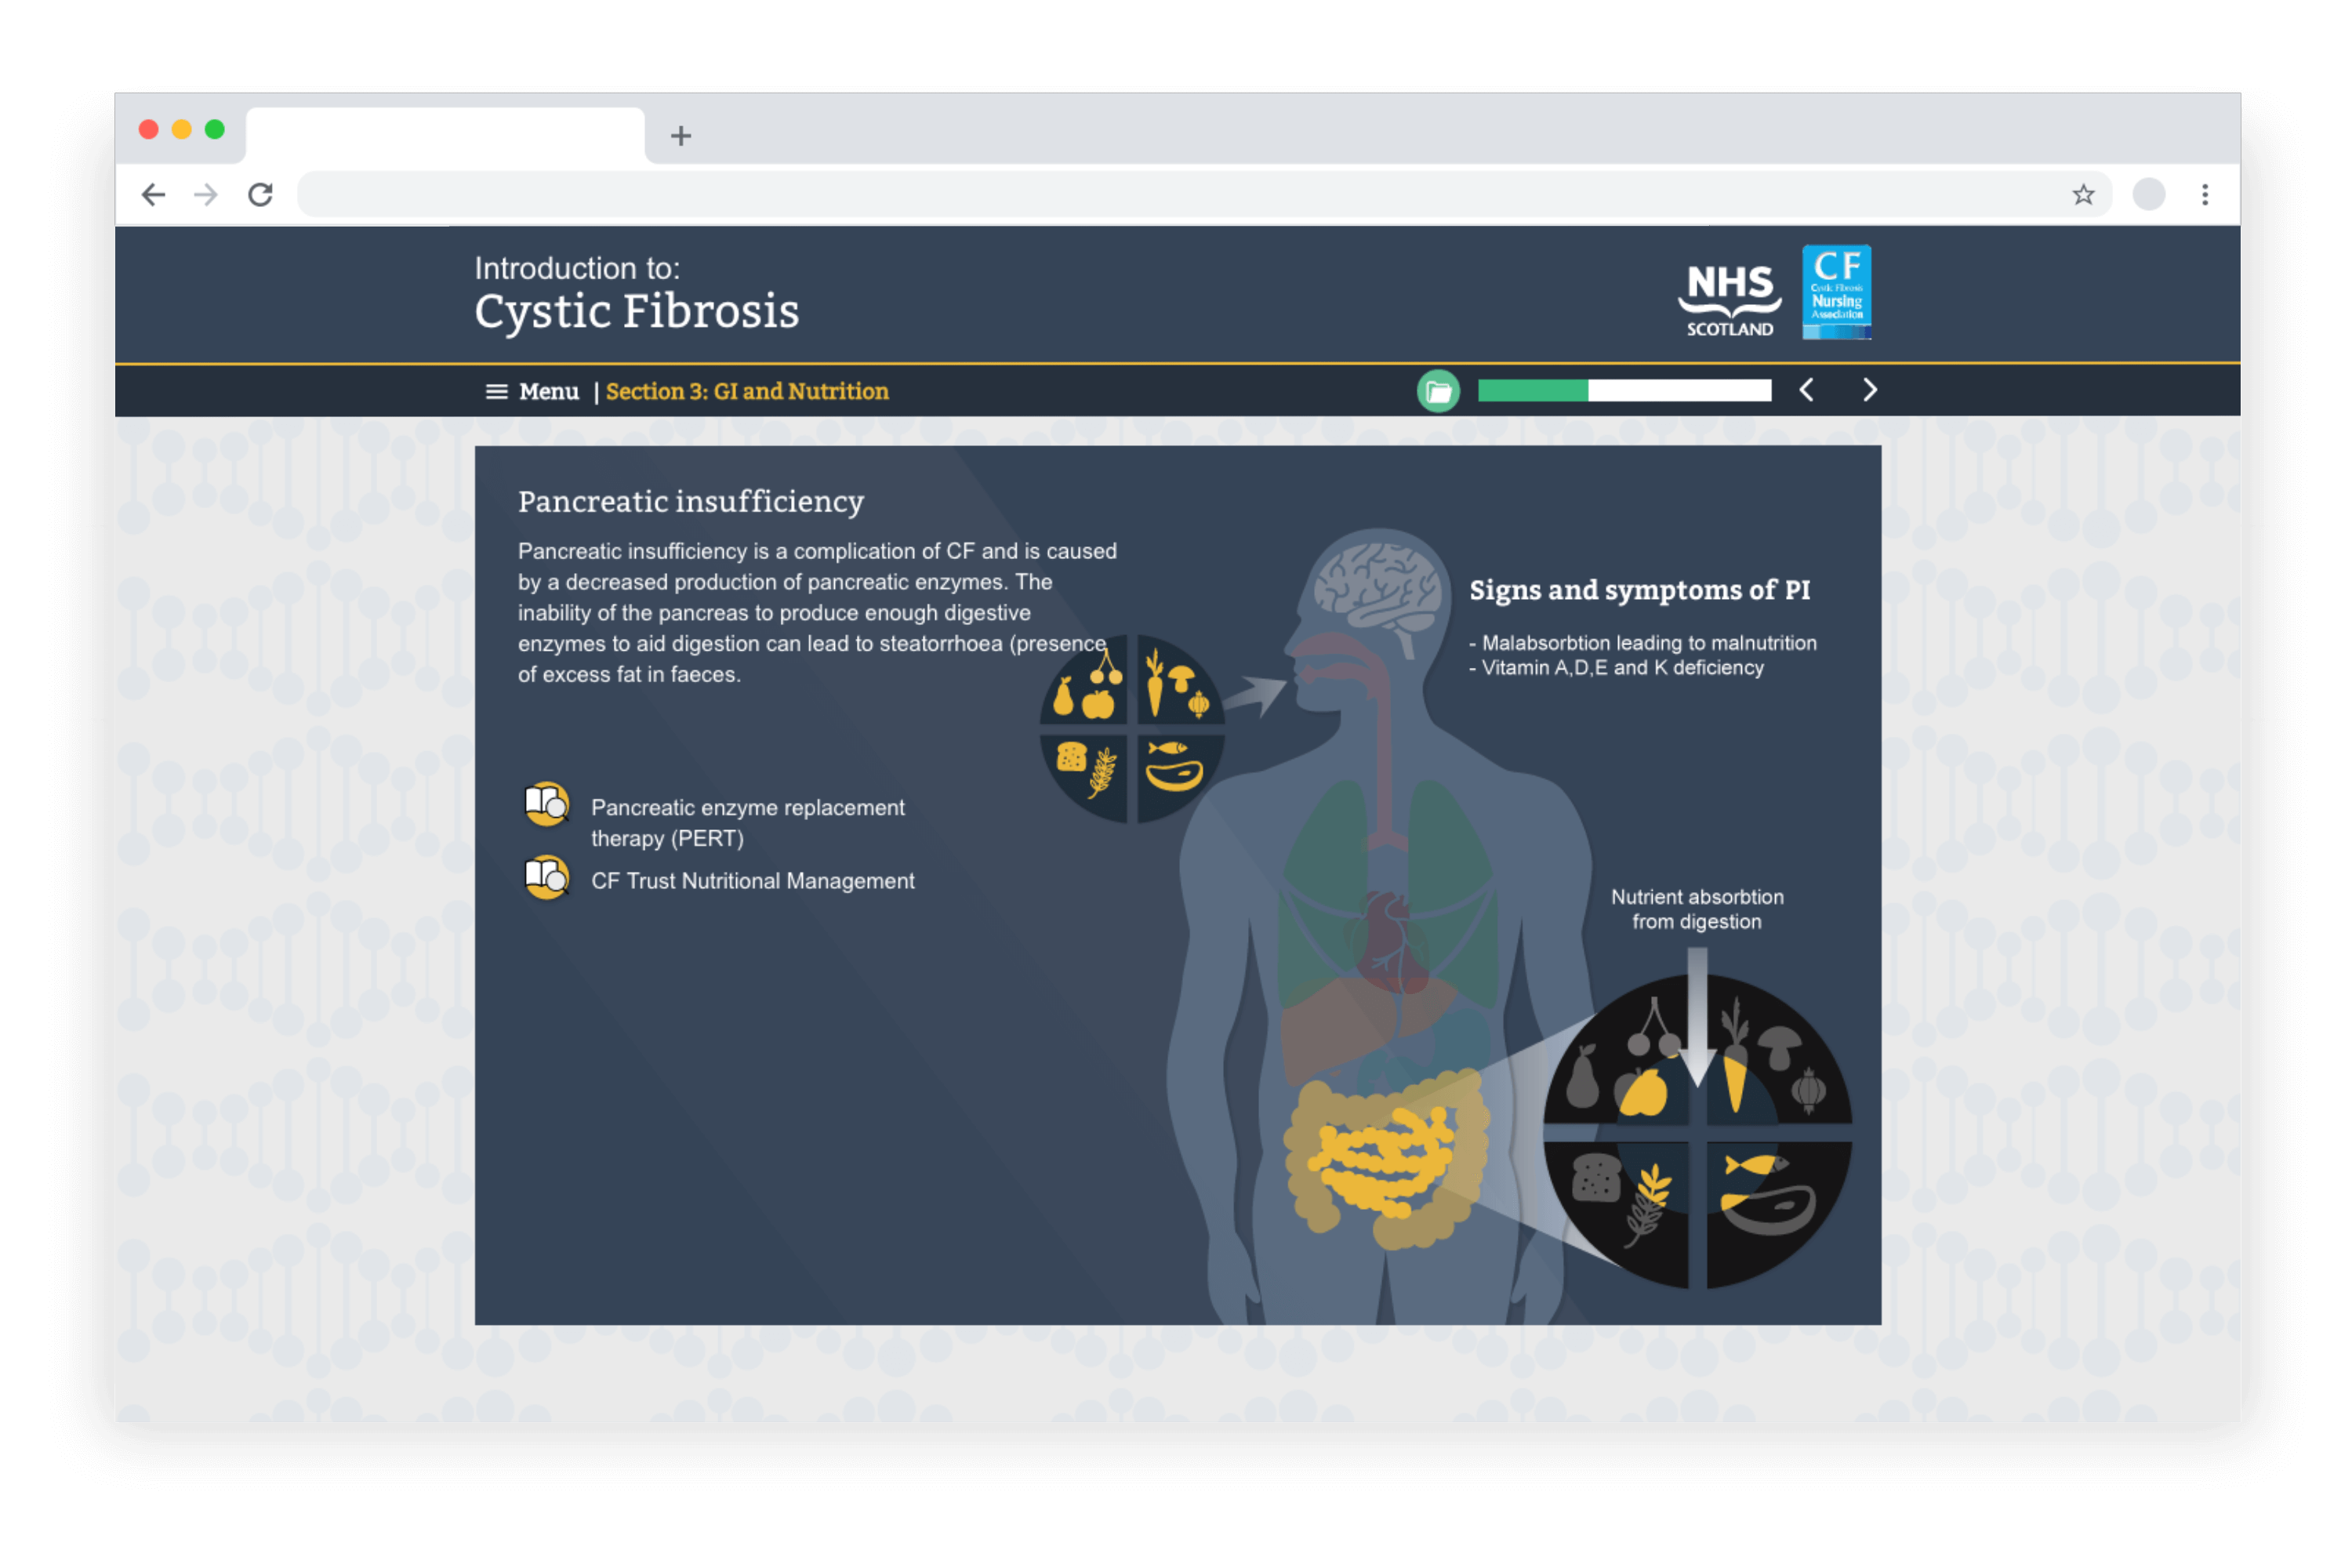 Example e-learning showing a Cystic Fibrosis course developed in LAB Advanced